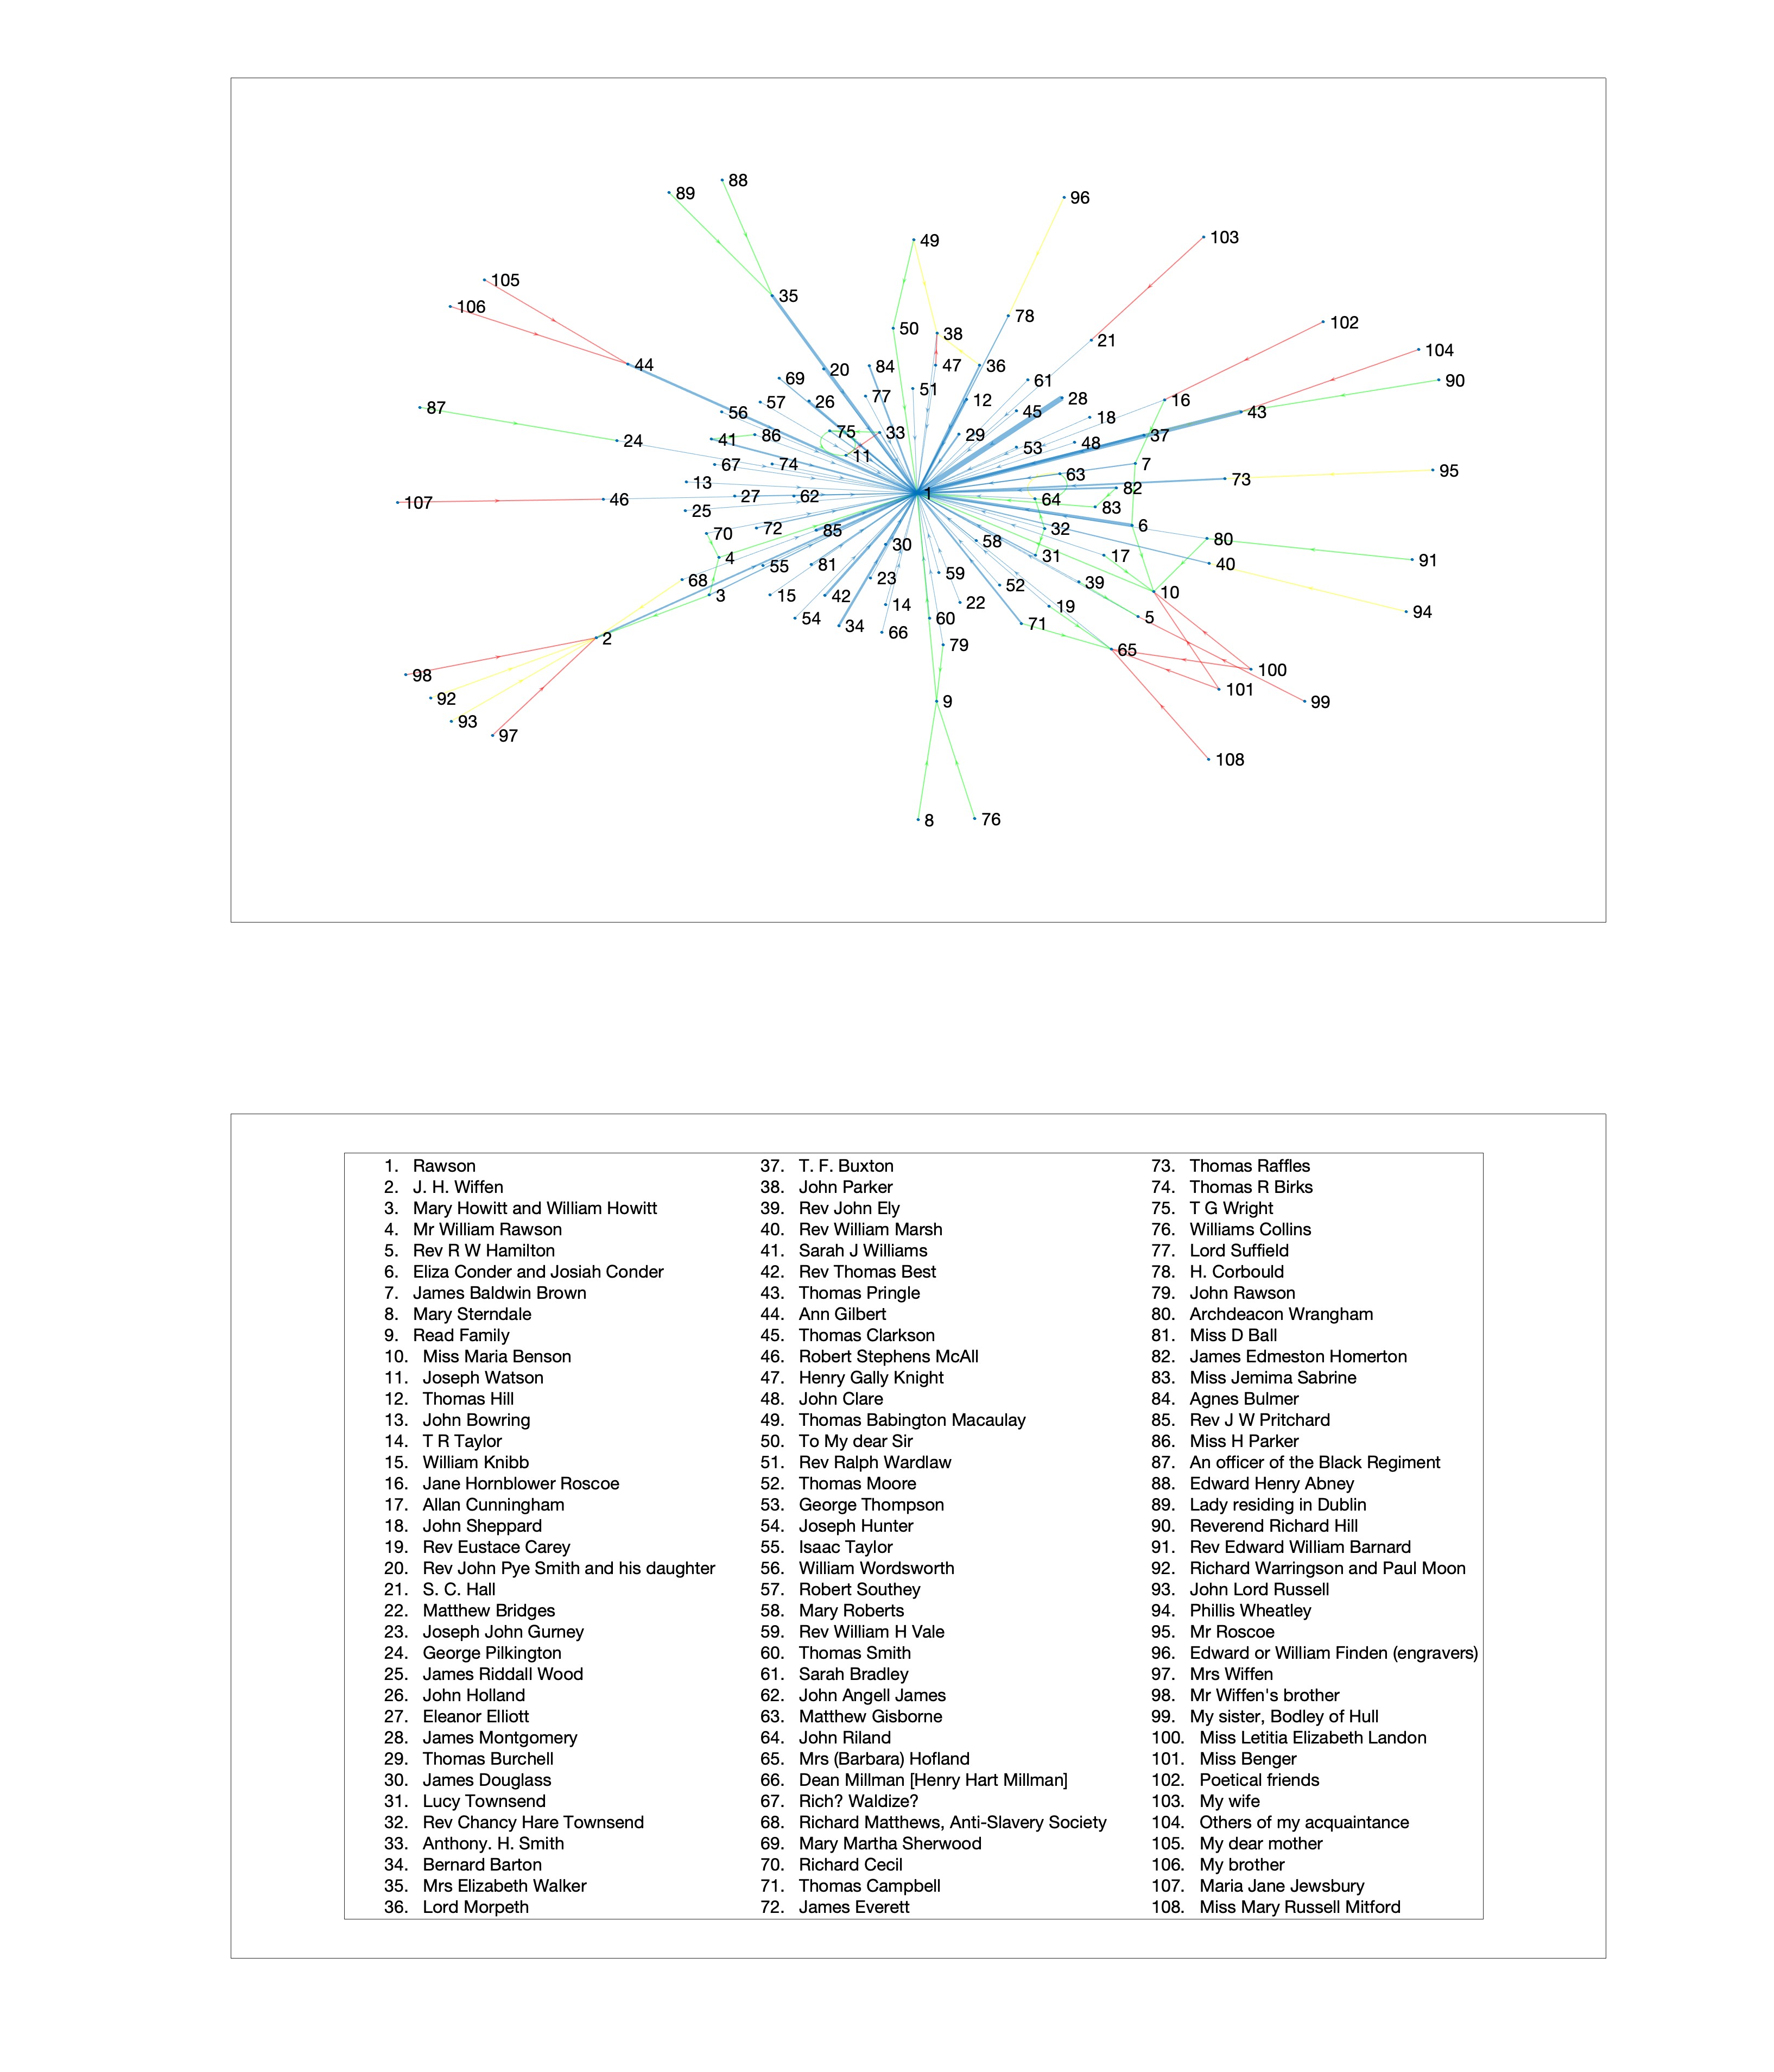 Network graph visualizing the
              relationships between Rawson and her correspondents